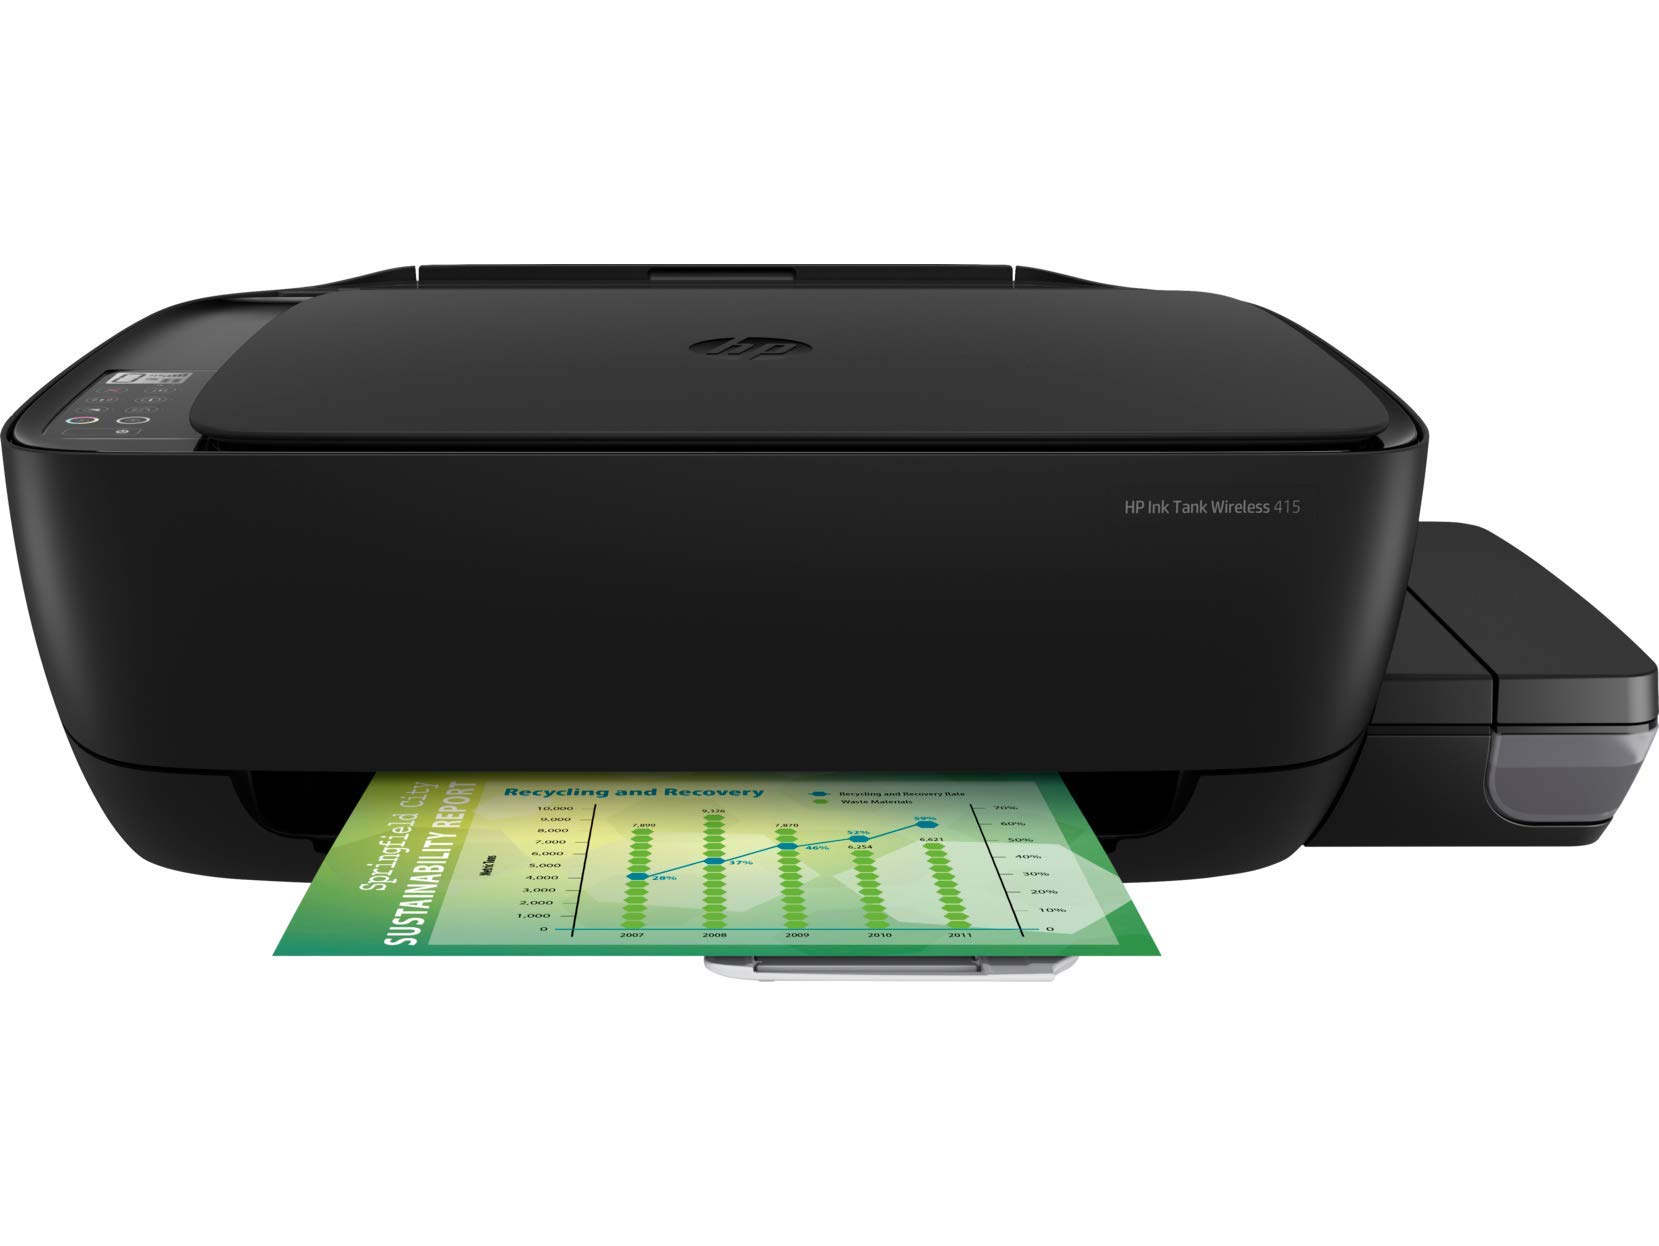 415 All-in-One Printer With Print Scan Copy Wi-Fi Function And Ink Tank System,Z4B53A Black_2